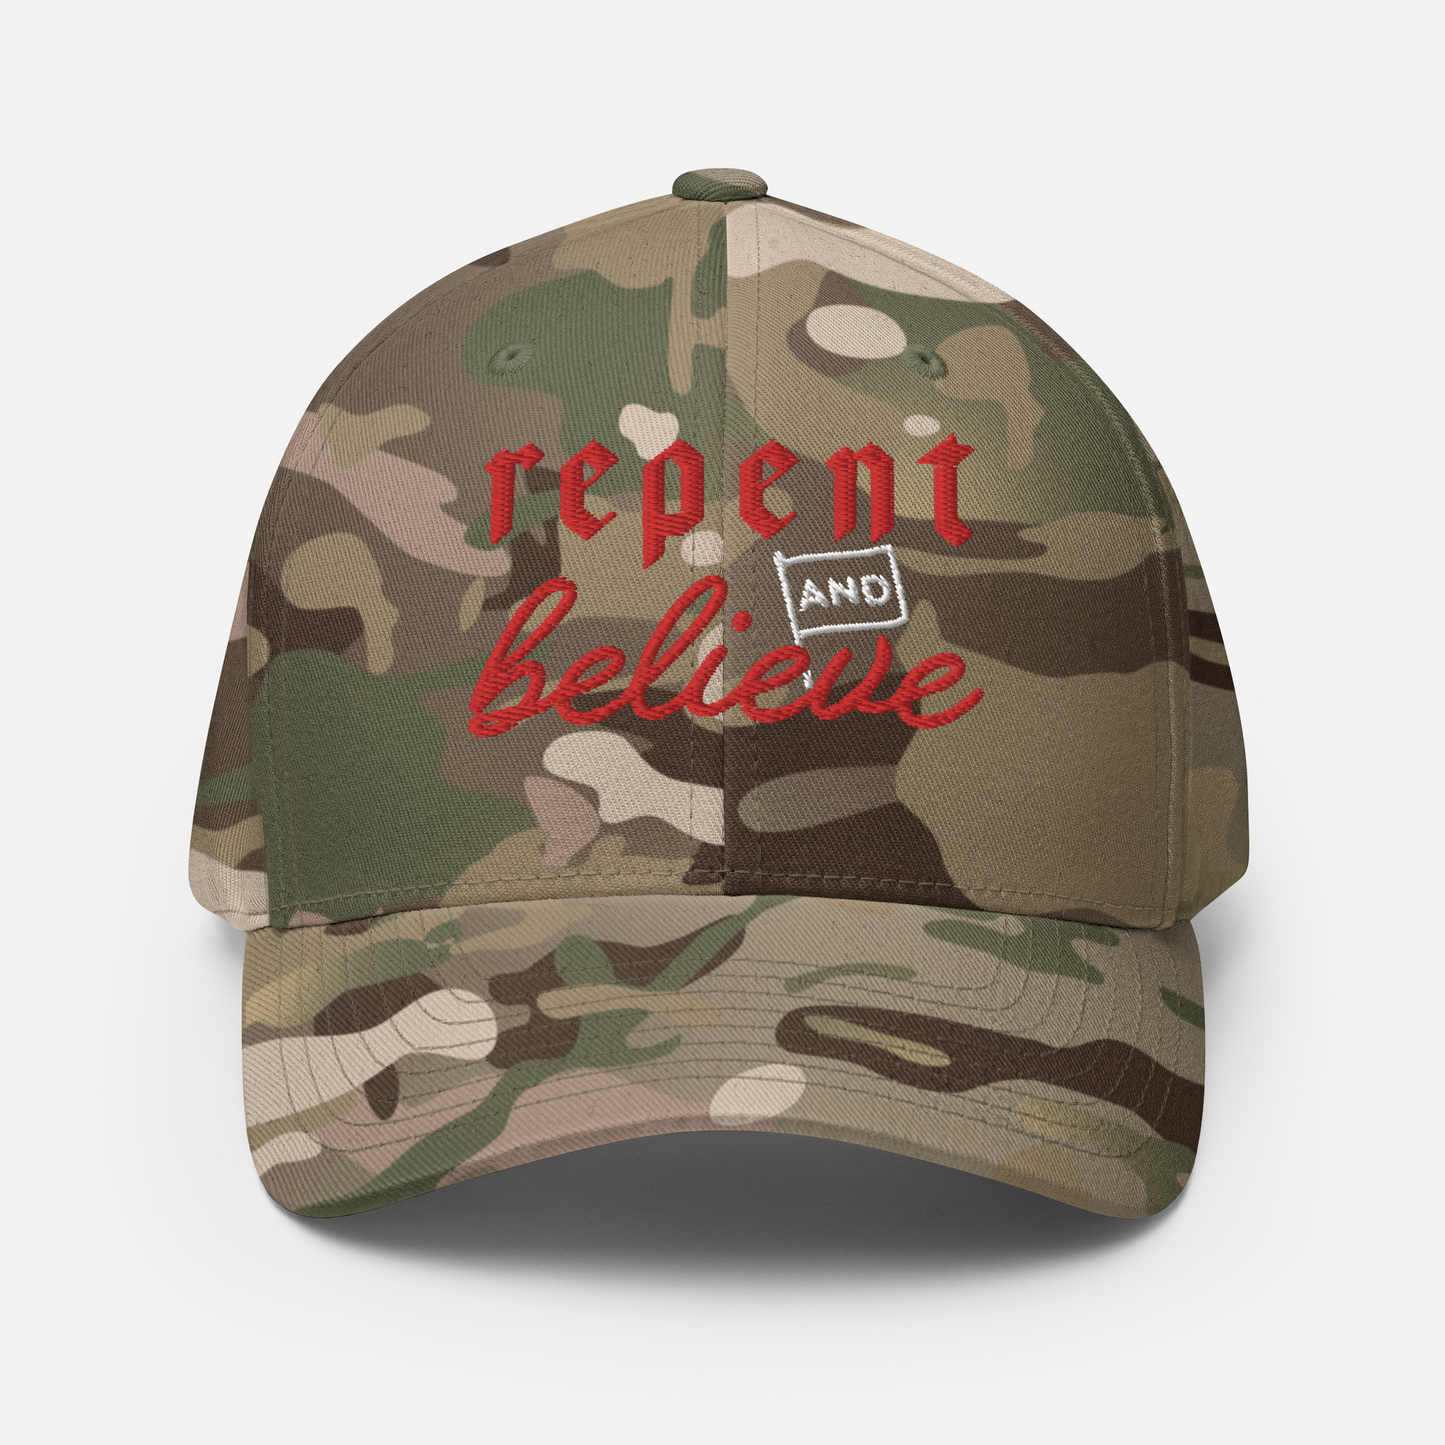 Repent and Believe Flexfit Hat